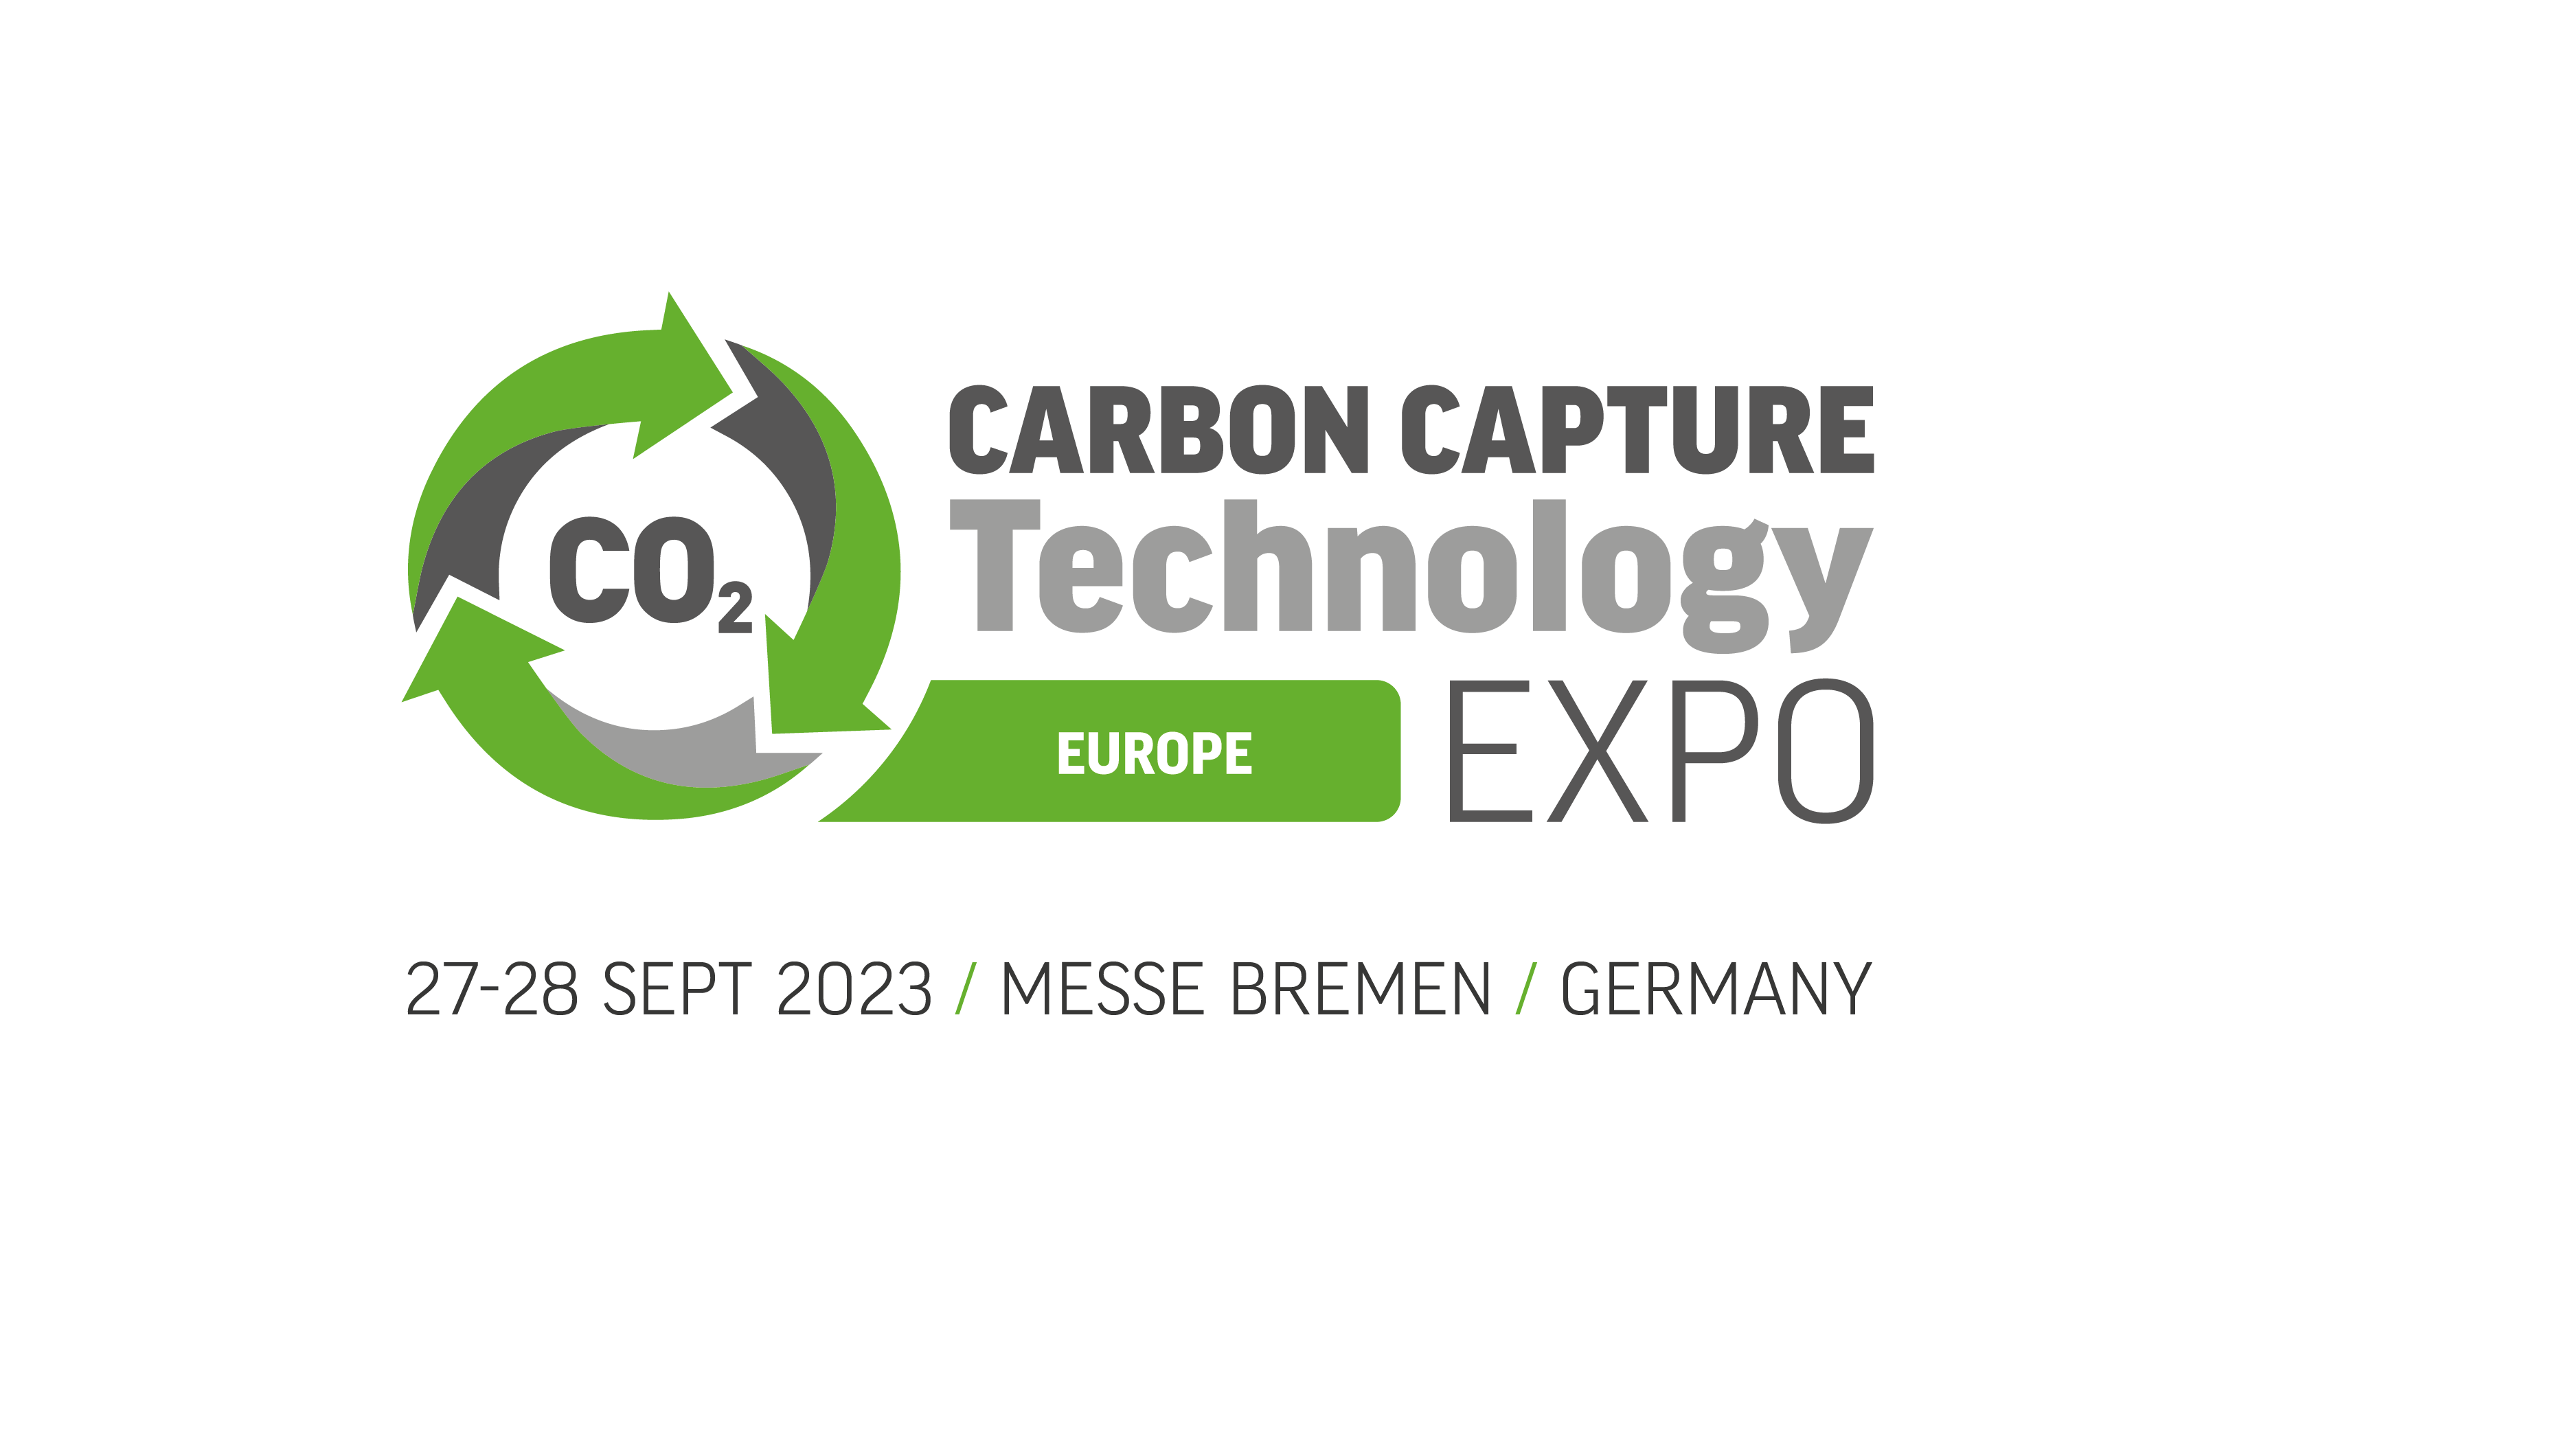 Carbon Capture Technology Expo Europe 2023